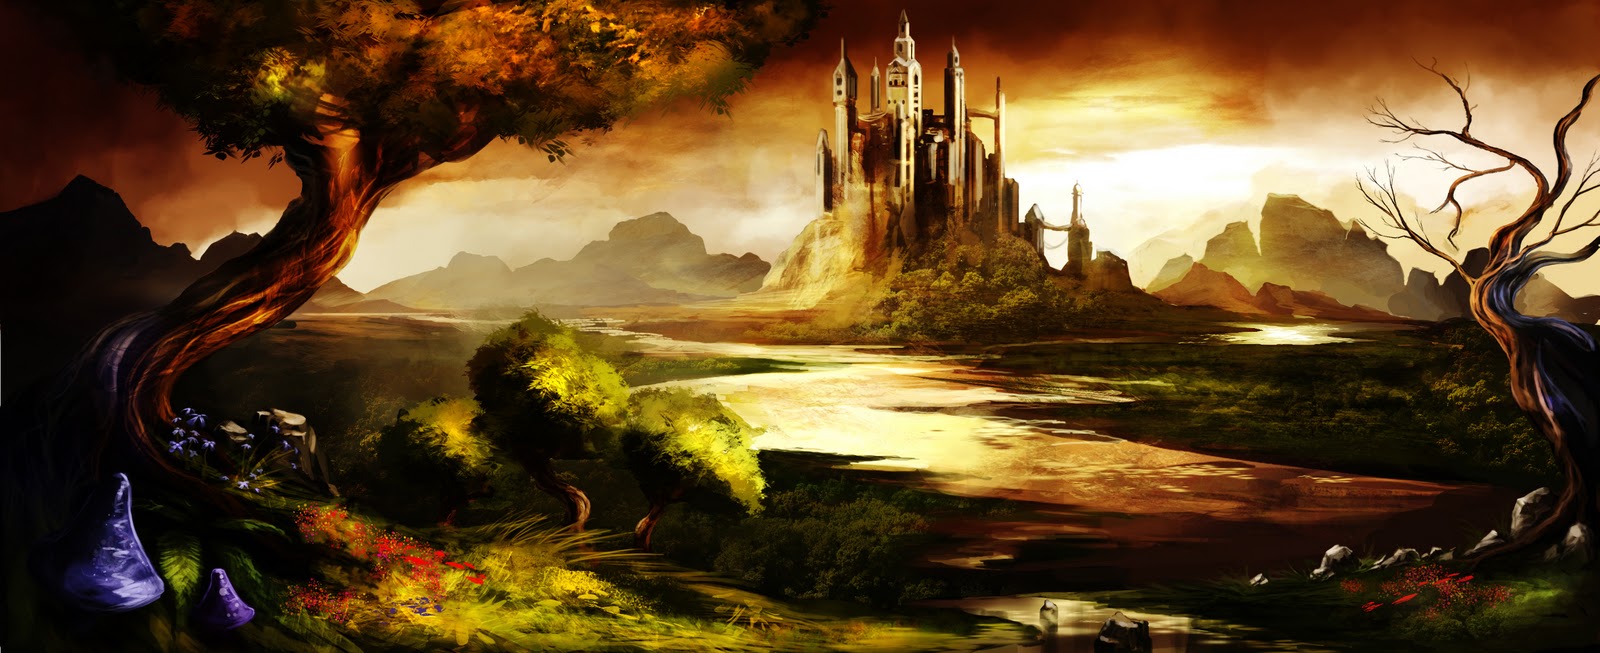 Trine Stunning HD Game Wallpapers| HD Wallpapers ...